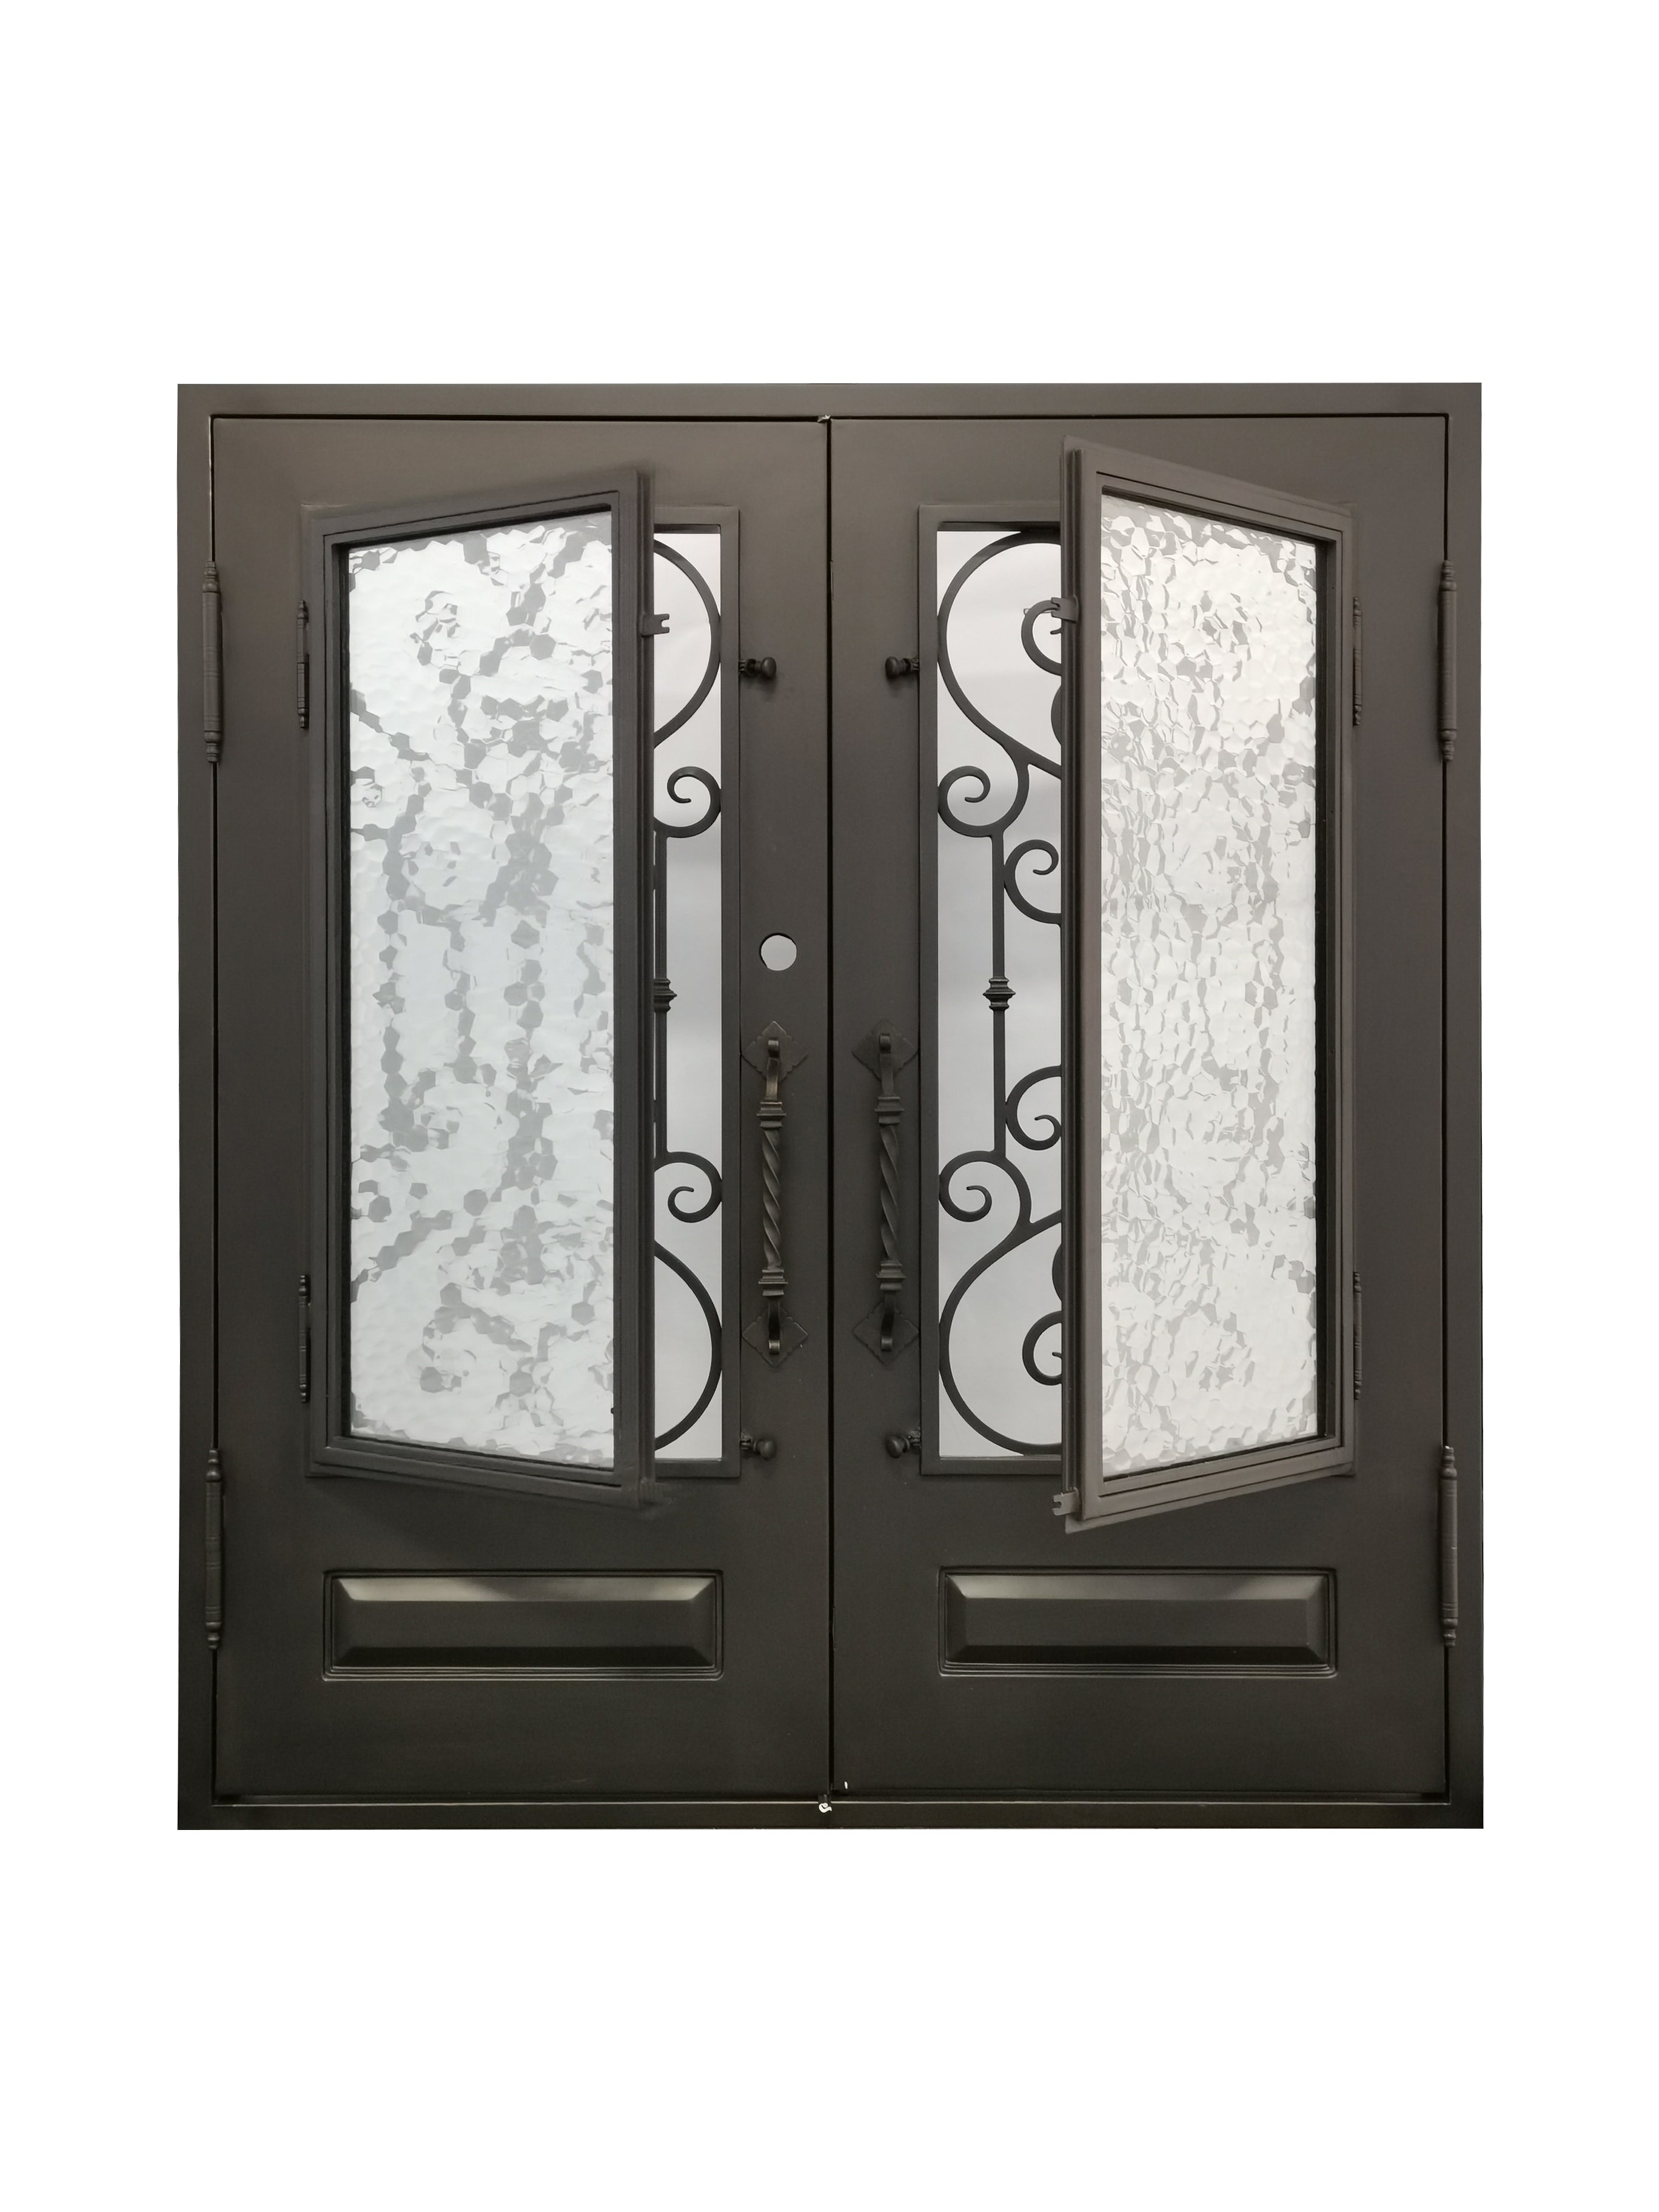 Bellmead Model Double Front Entry Iron Door With Tempered Water Cube Glass Dark Bronze Finish - AAWAIZ IMPORTS